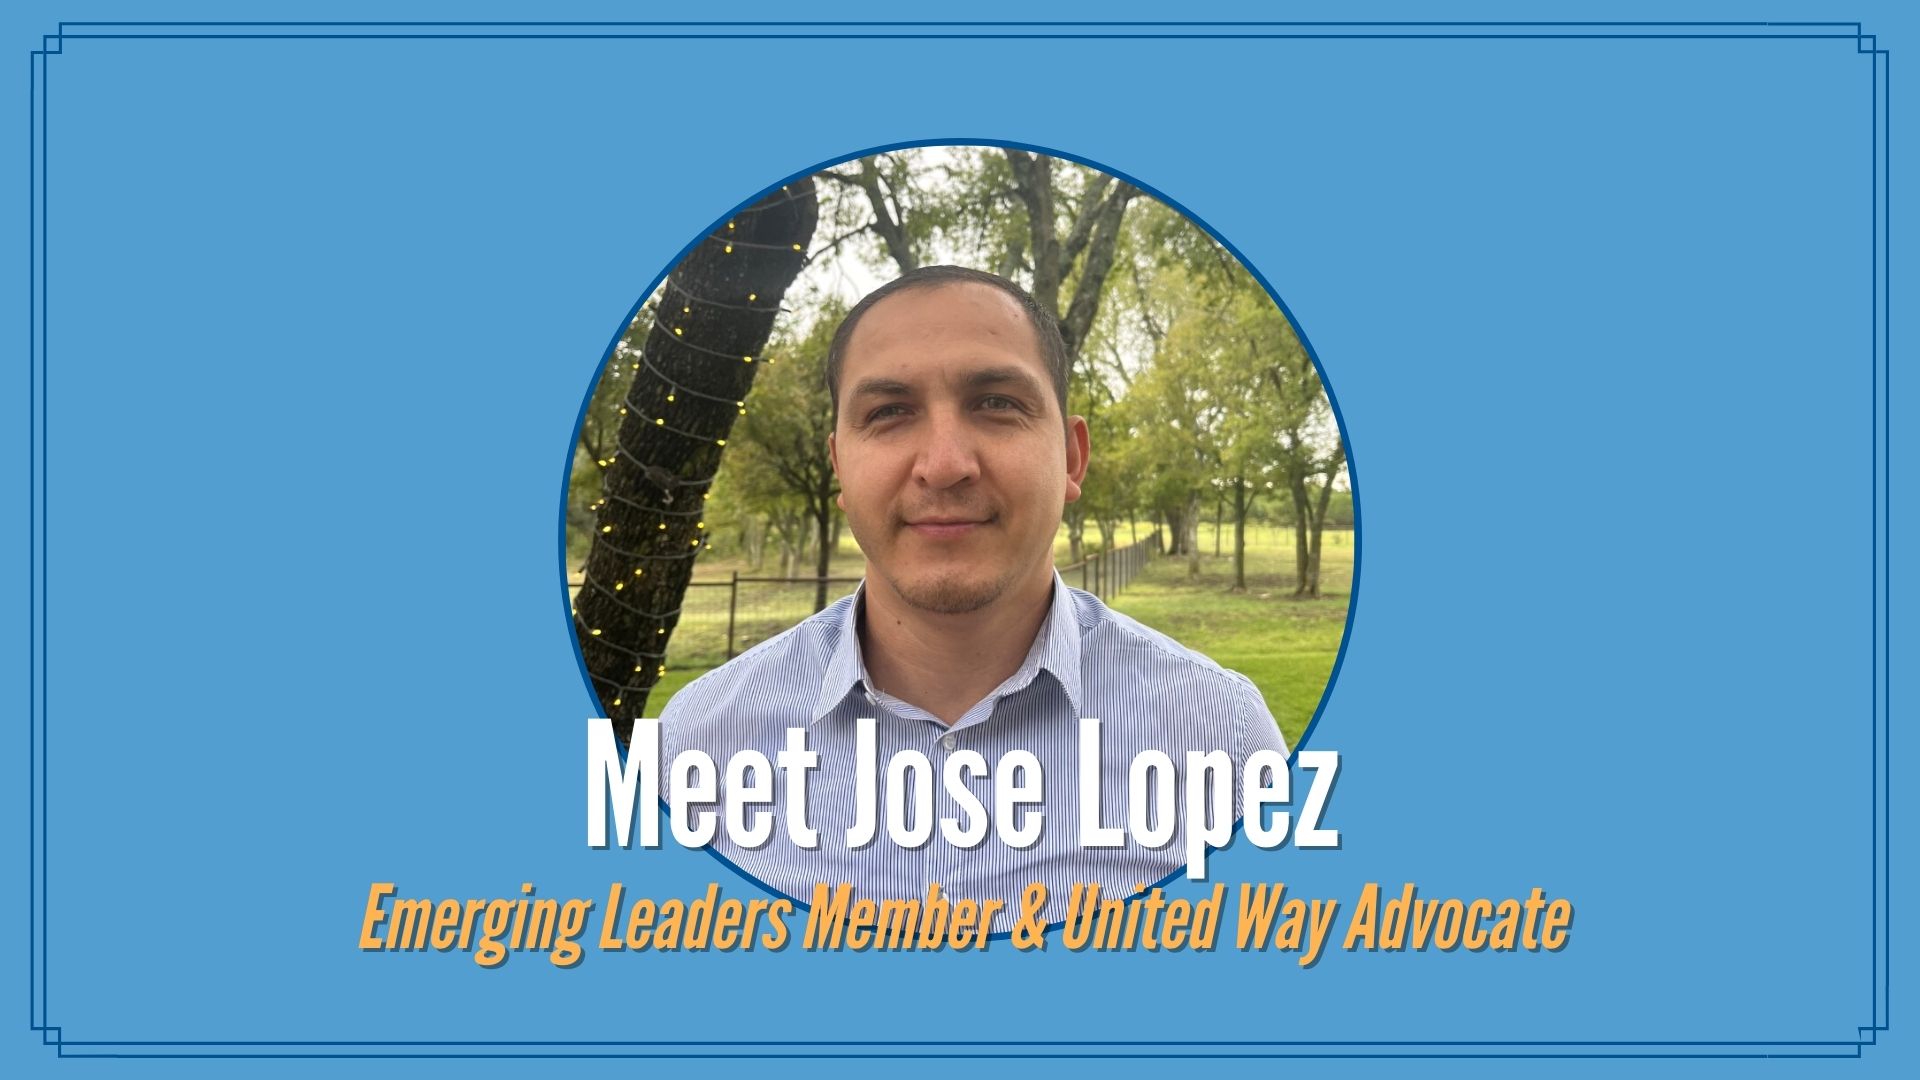 Image of Jose that reads "meet jose lopez, emerging leaders member and United Way advocate"